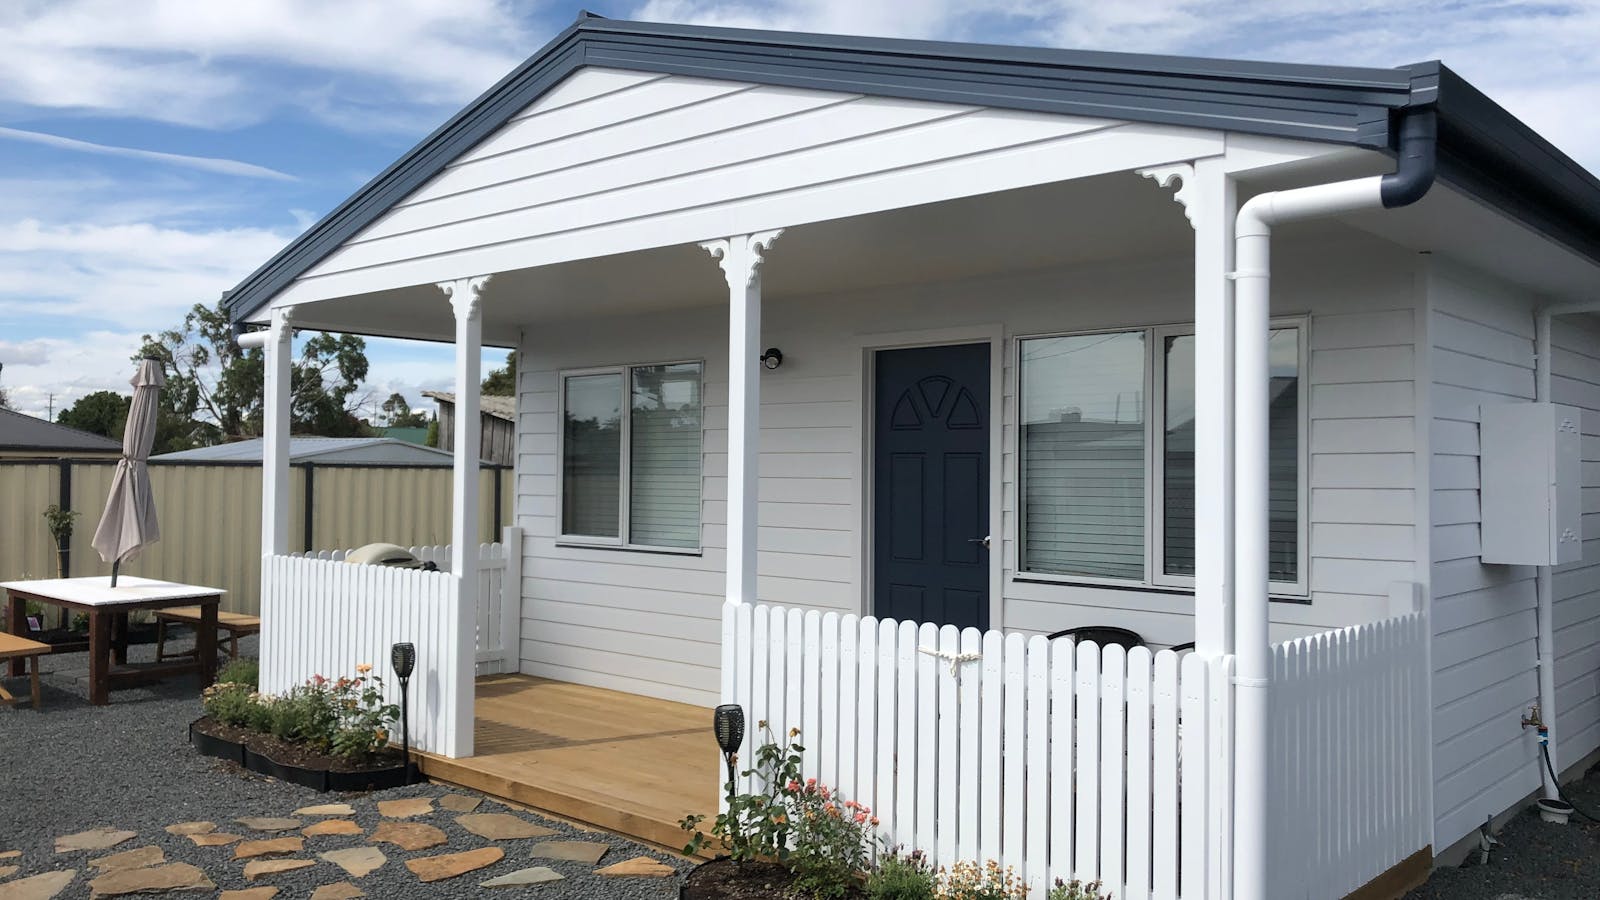 'Travellers Rest' Cressy Tas is a seperate fully contained 1 bedroom cottage.